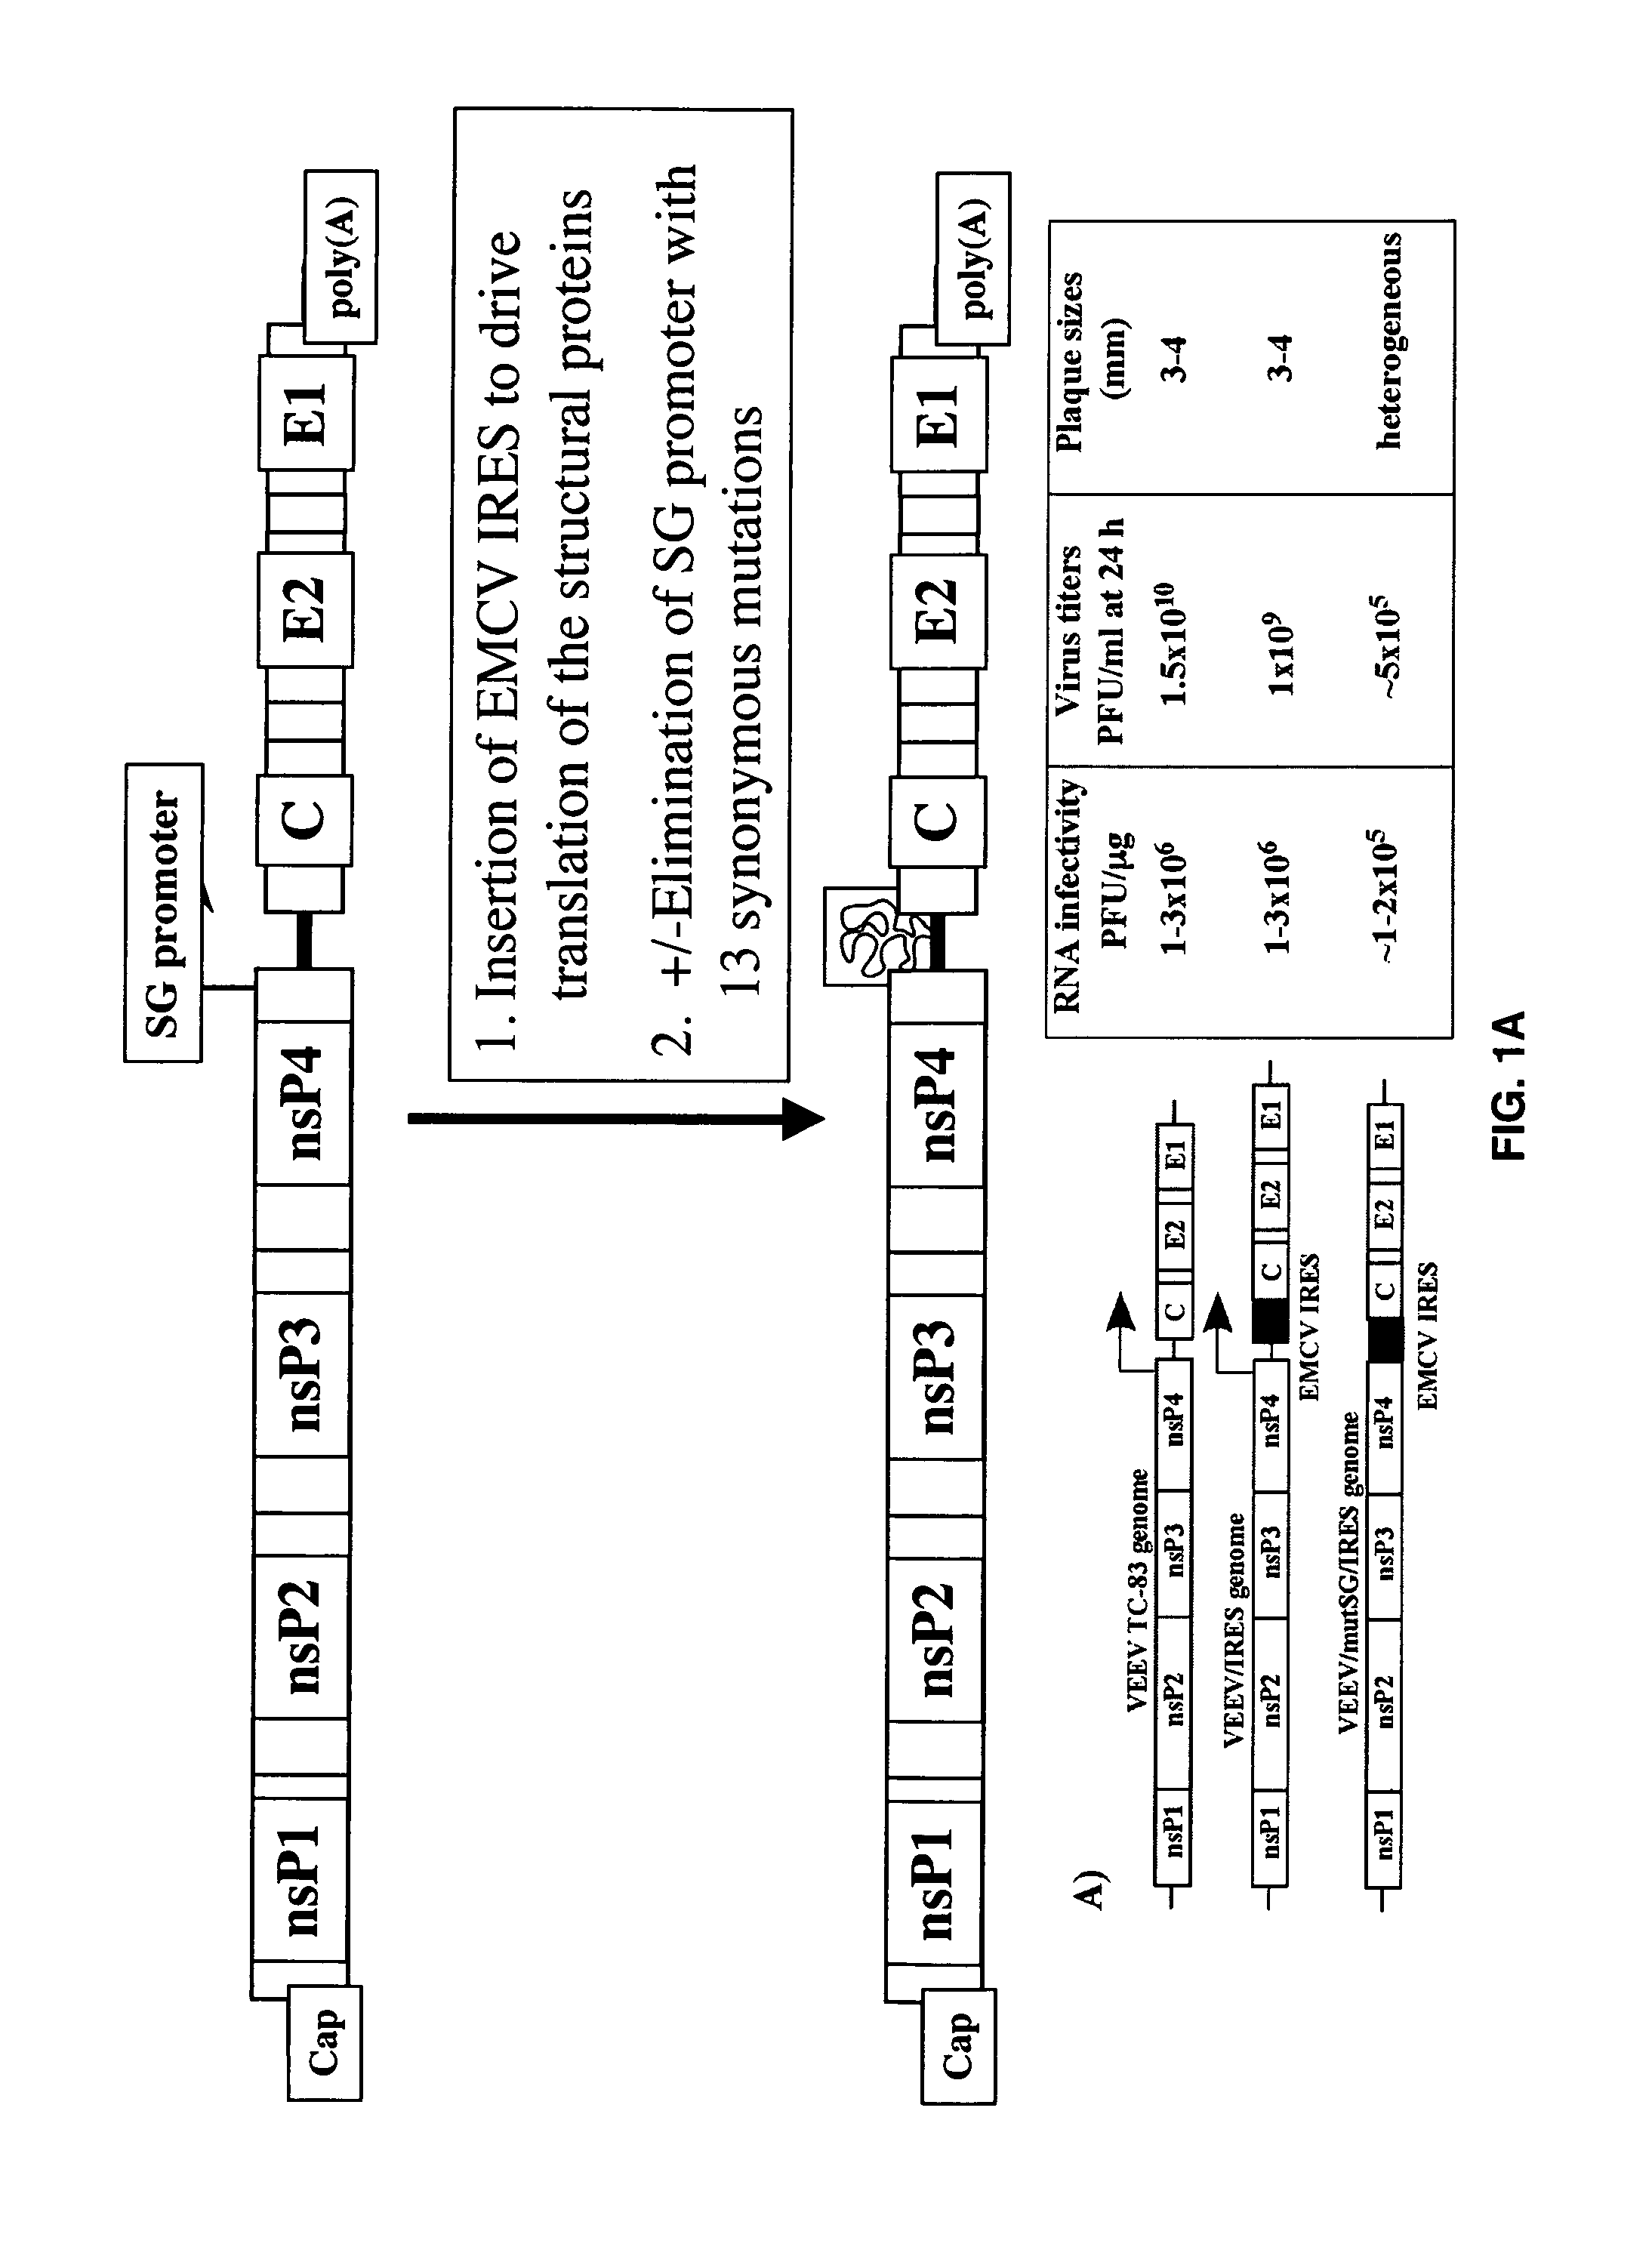 Attenuated recombinant alphaviruses incapable of replicating in mosquitoes and uses thereof